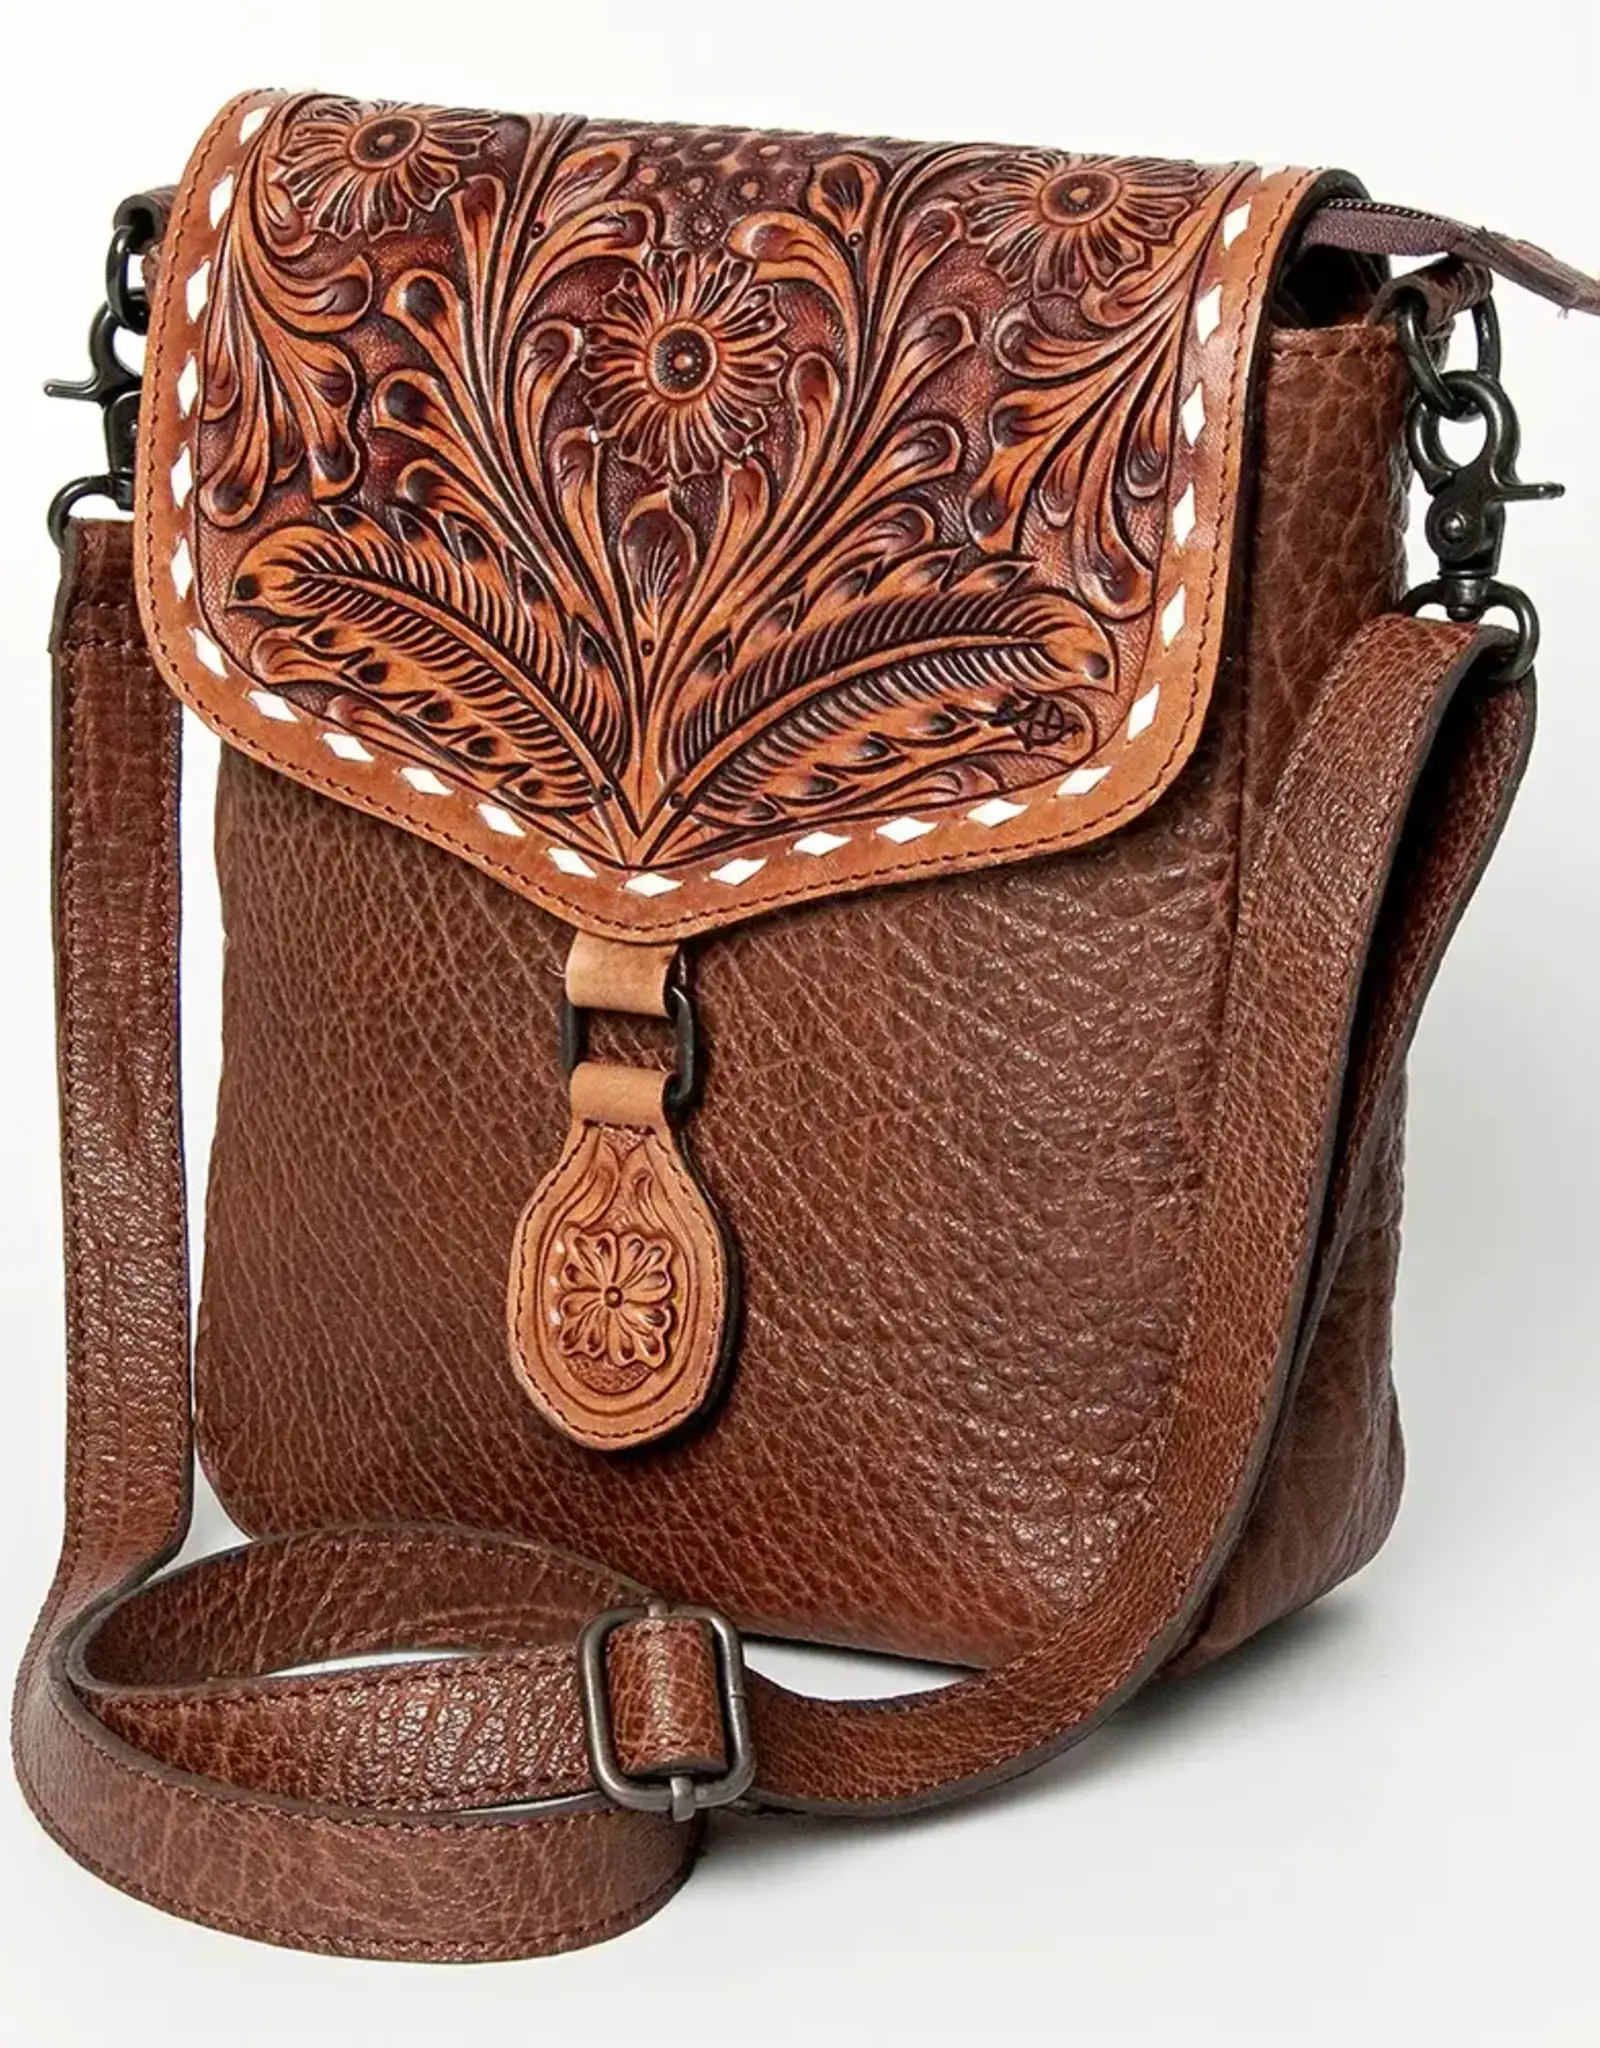 Fine Hand-Tooled Leather Clutch, Purse, best, online, women, gifts – ALLE  Handbags